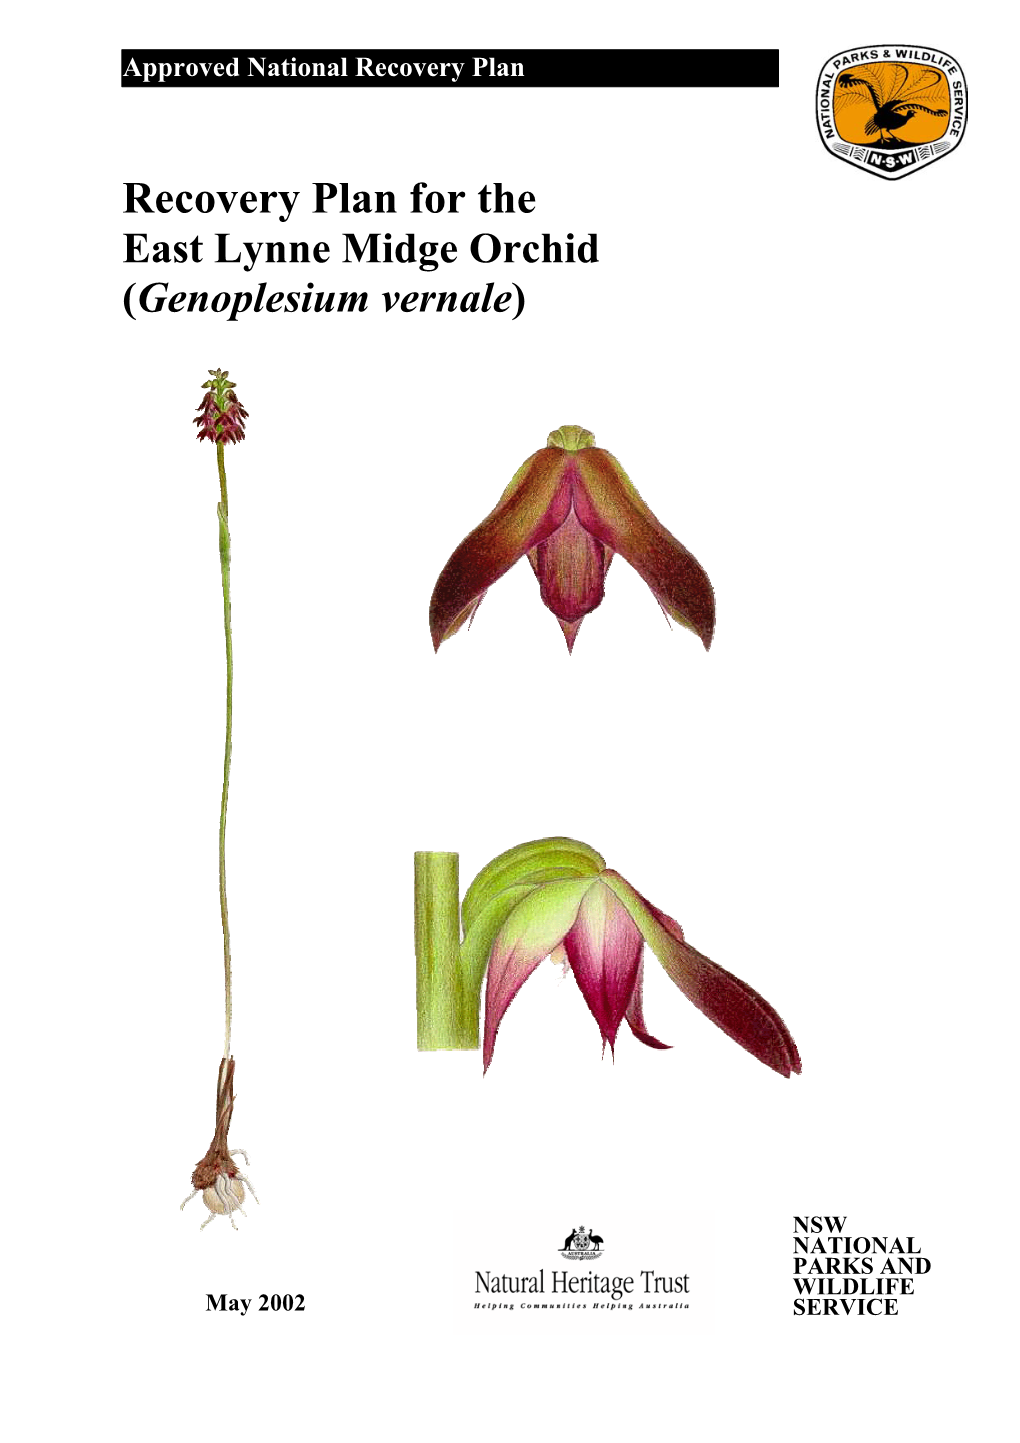 Recovery Plan for the East Lynne Midge Orchid (Genoplesium Vernale)